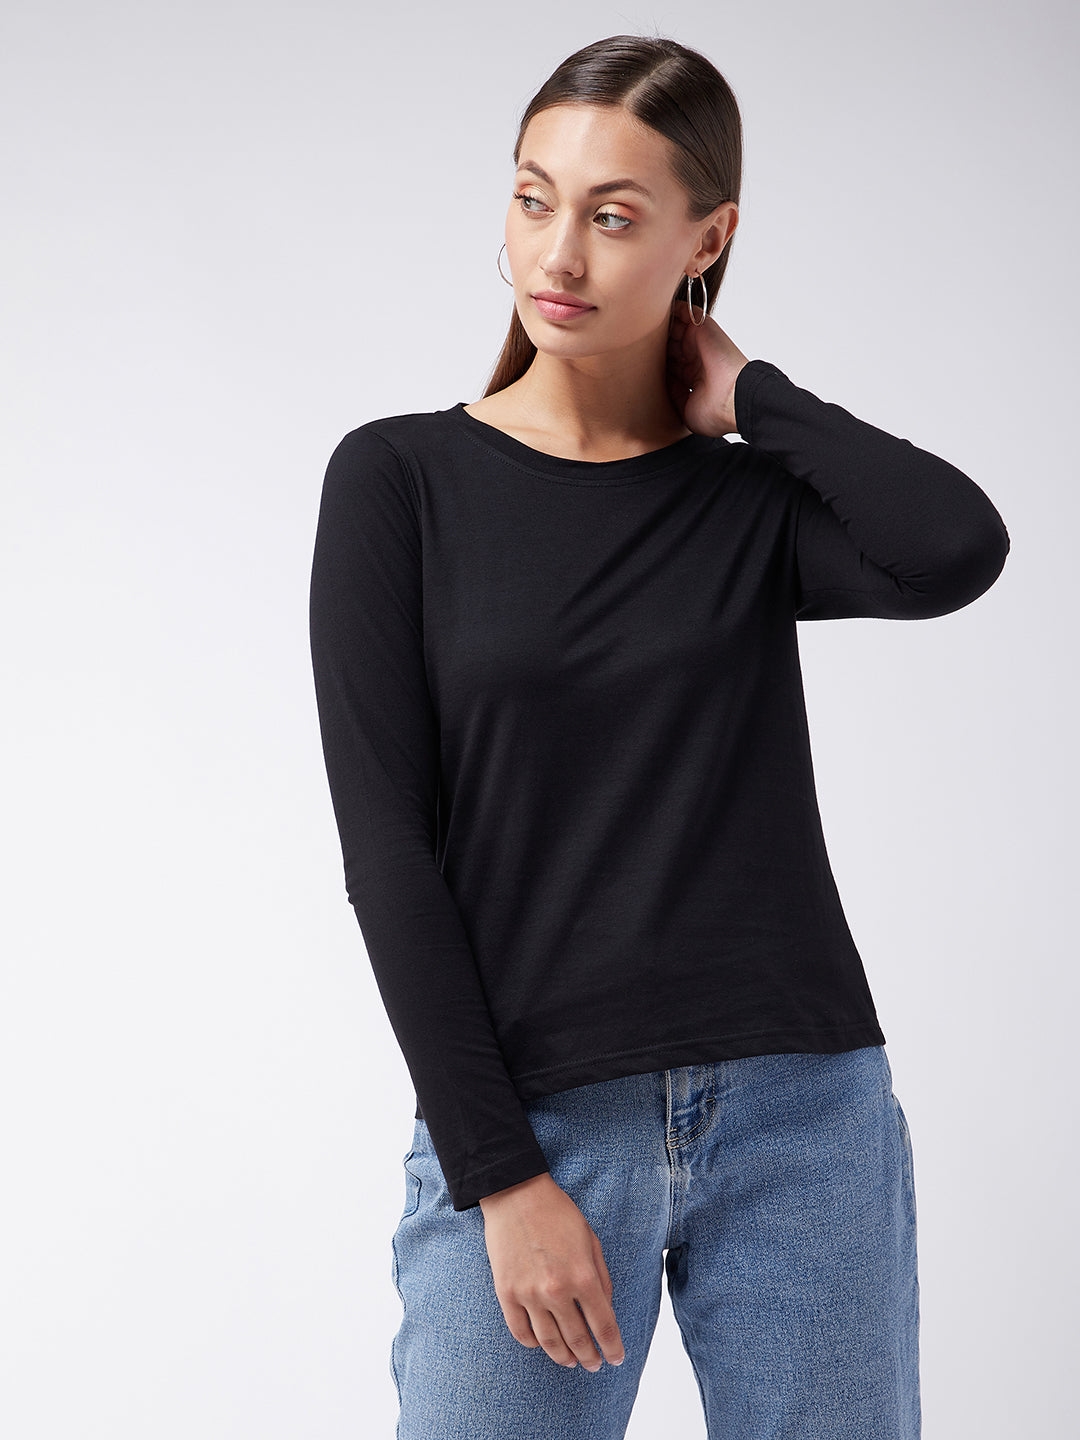 Black Round Neck Full Sleeves Solid Basic Top